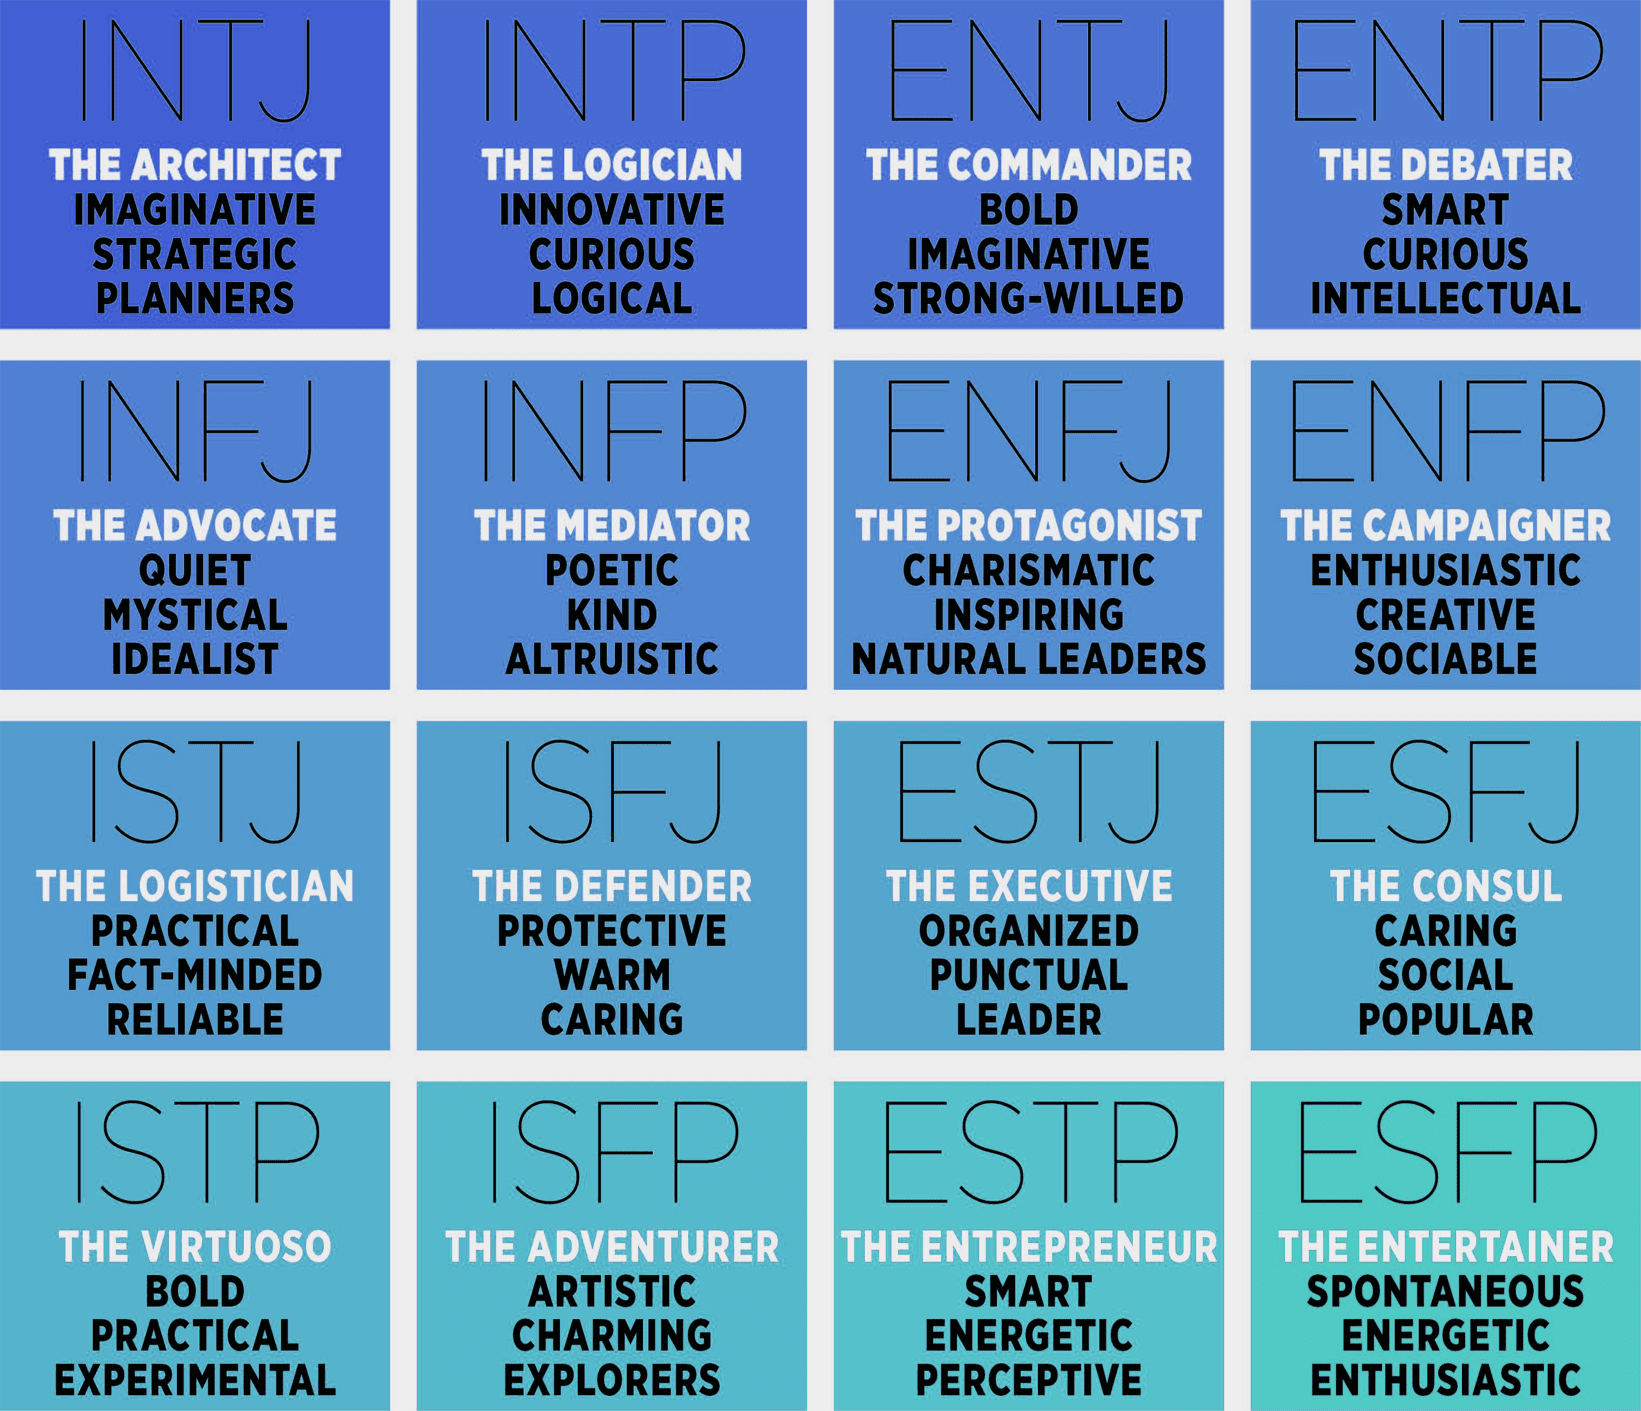 Who can administer the Myers-Briggs test?